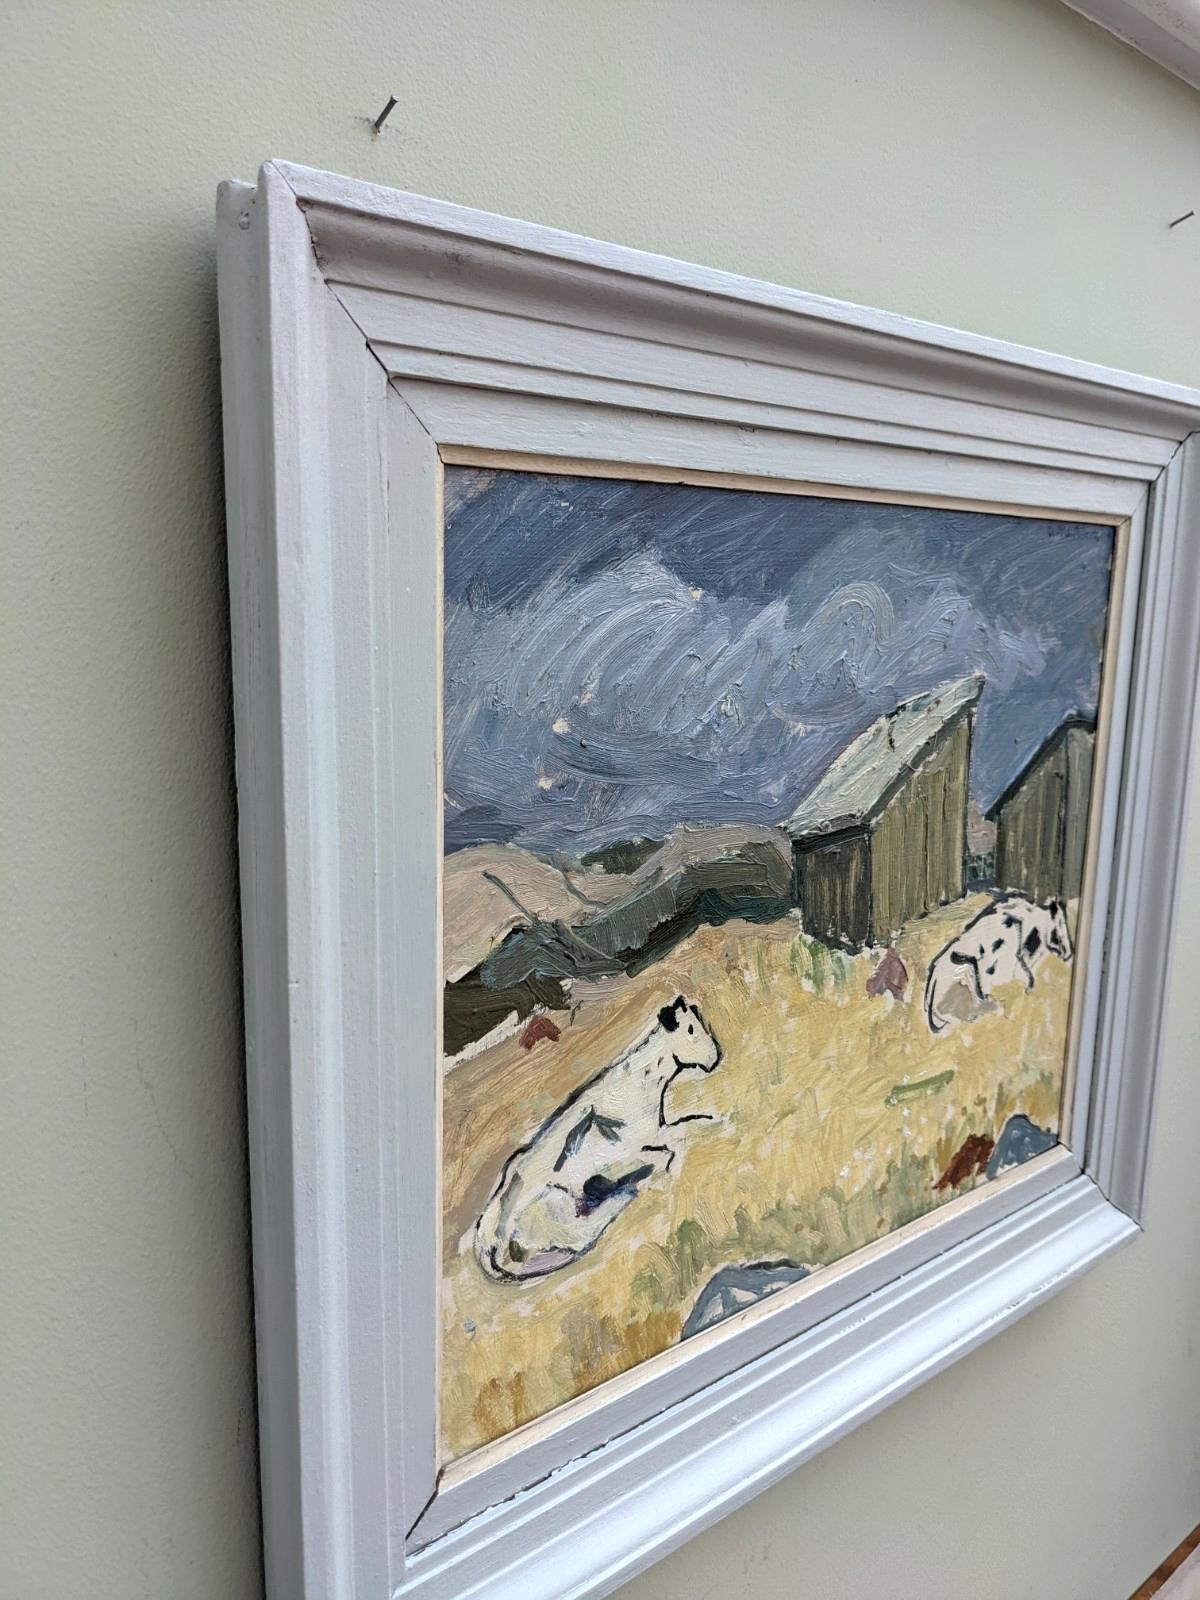 BEFORE THE RAIN
Size: 45 x 53 cm (including frame)
Oil on board

A mid century landscape motif painted in oil onto board, and framed in a very complementary light blue frame.

A pair of cows rest on the rural pasture, and behind them sit two farm